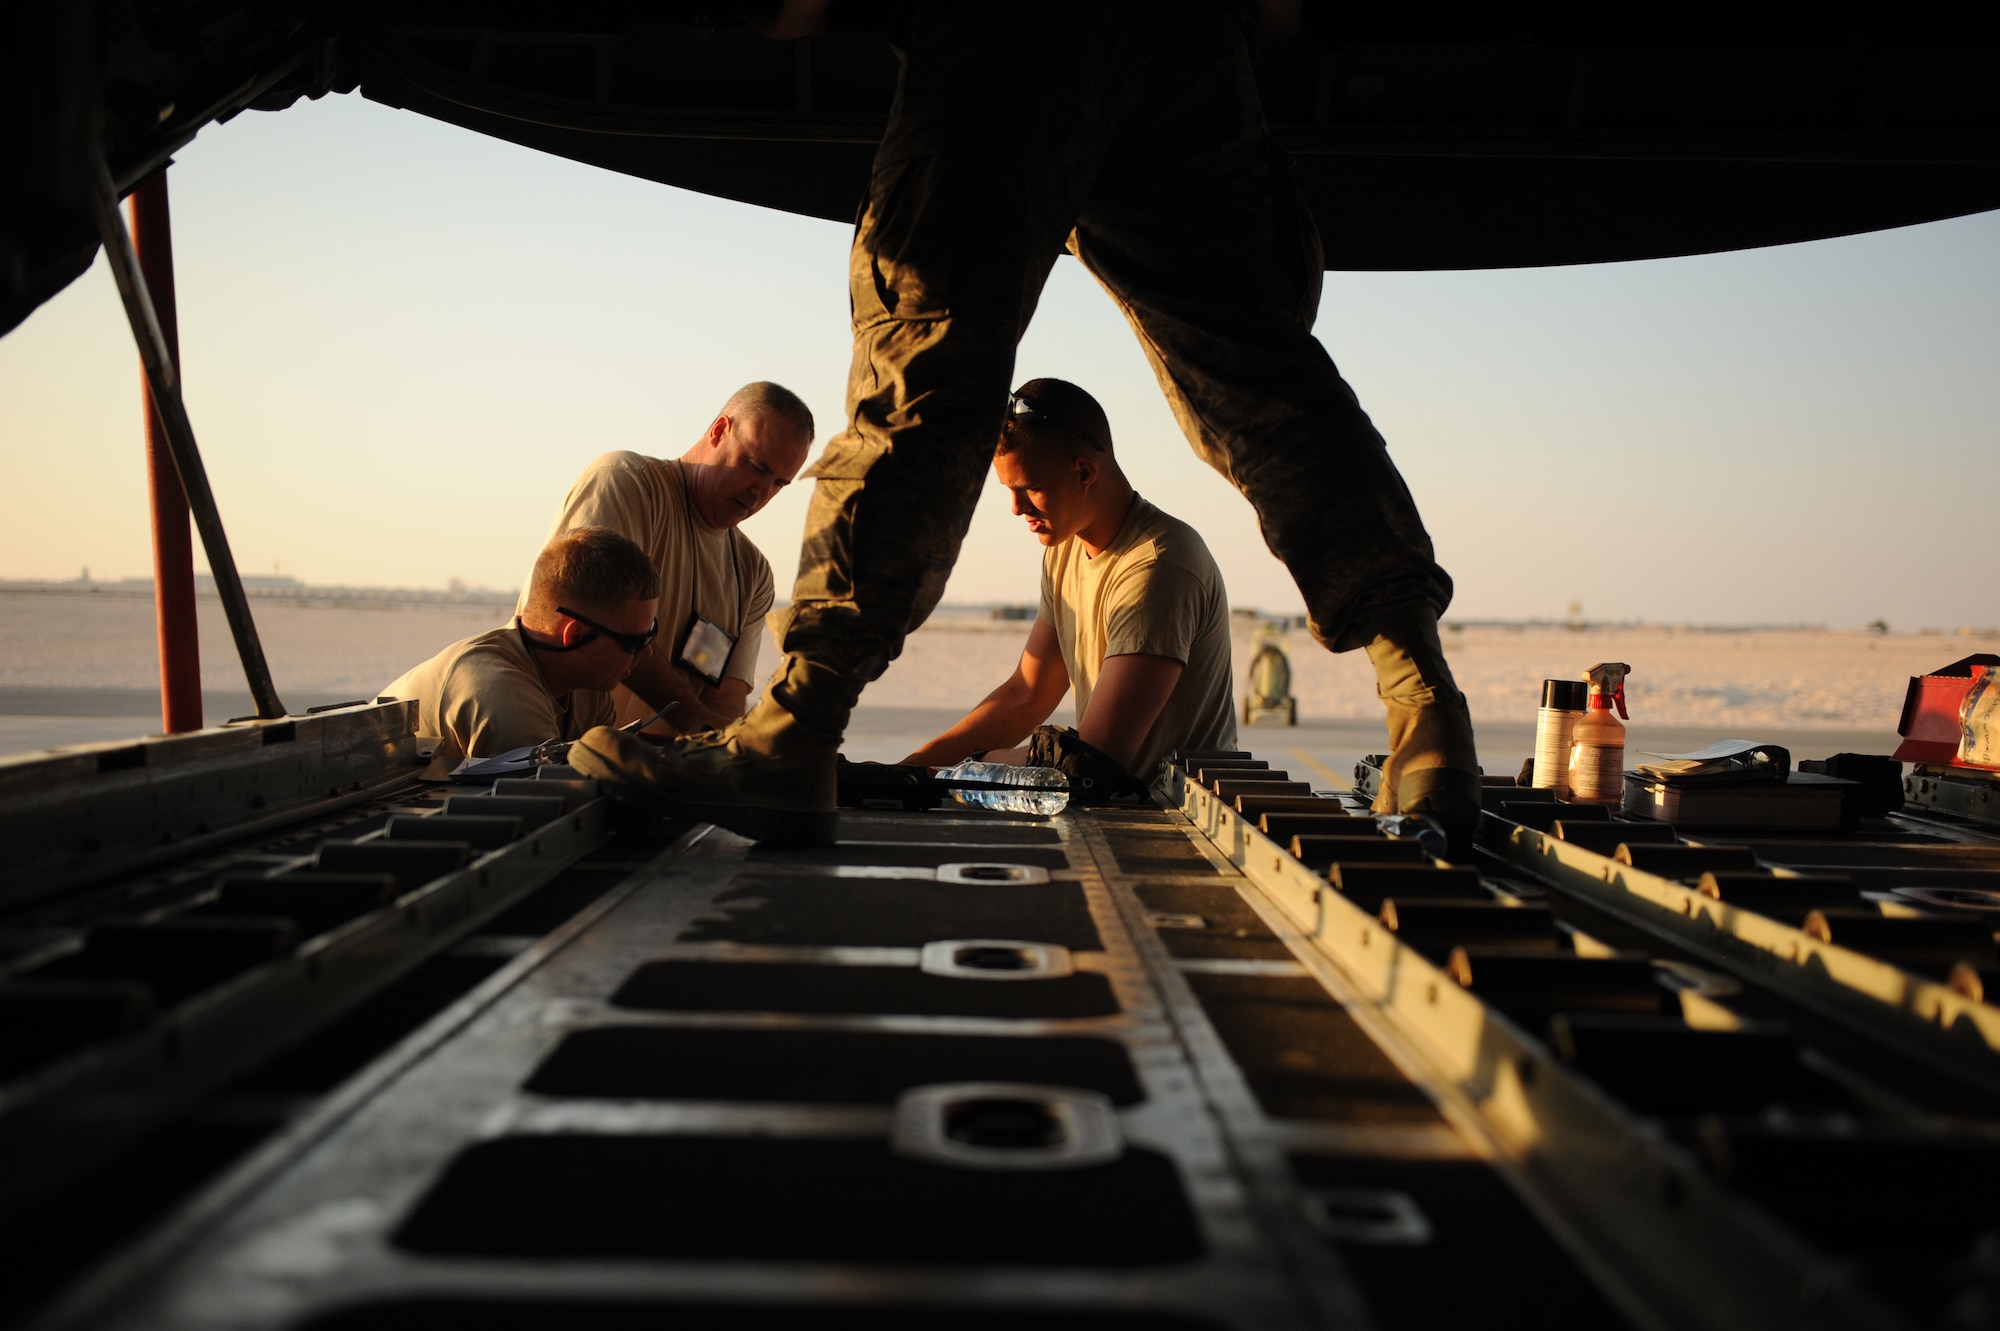 SOUTHWEST ASIA – Maintainers from the 746th Expeditionary Aircraft Maintenance Unit perform maintenance on a flap rod during a home station check here Feb. 28, 2012. The Airmen work on the aircraft 24-hours a day during home station checks to get the C-130 back into operational status as soon as possible. (U.S. Air Force photo/Staff Sgt. Nathanael Callon)